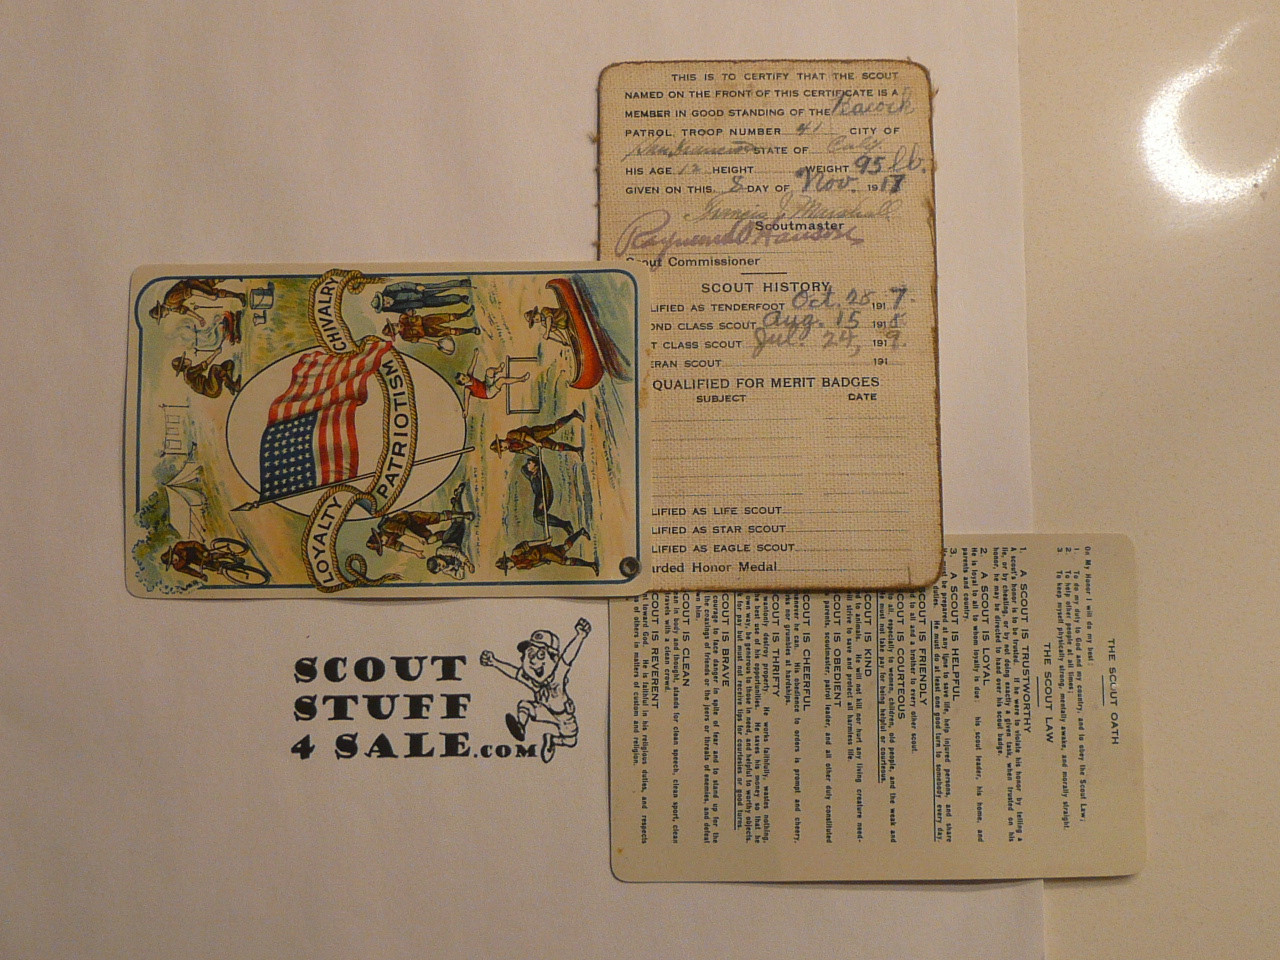 1918 Boy Scout Celluloid Membership Card, 6 signatures, 1918-4 variety, expires November 1918, BSMC247